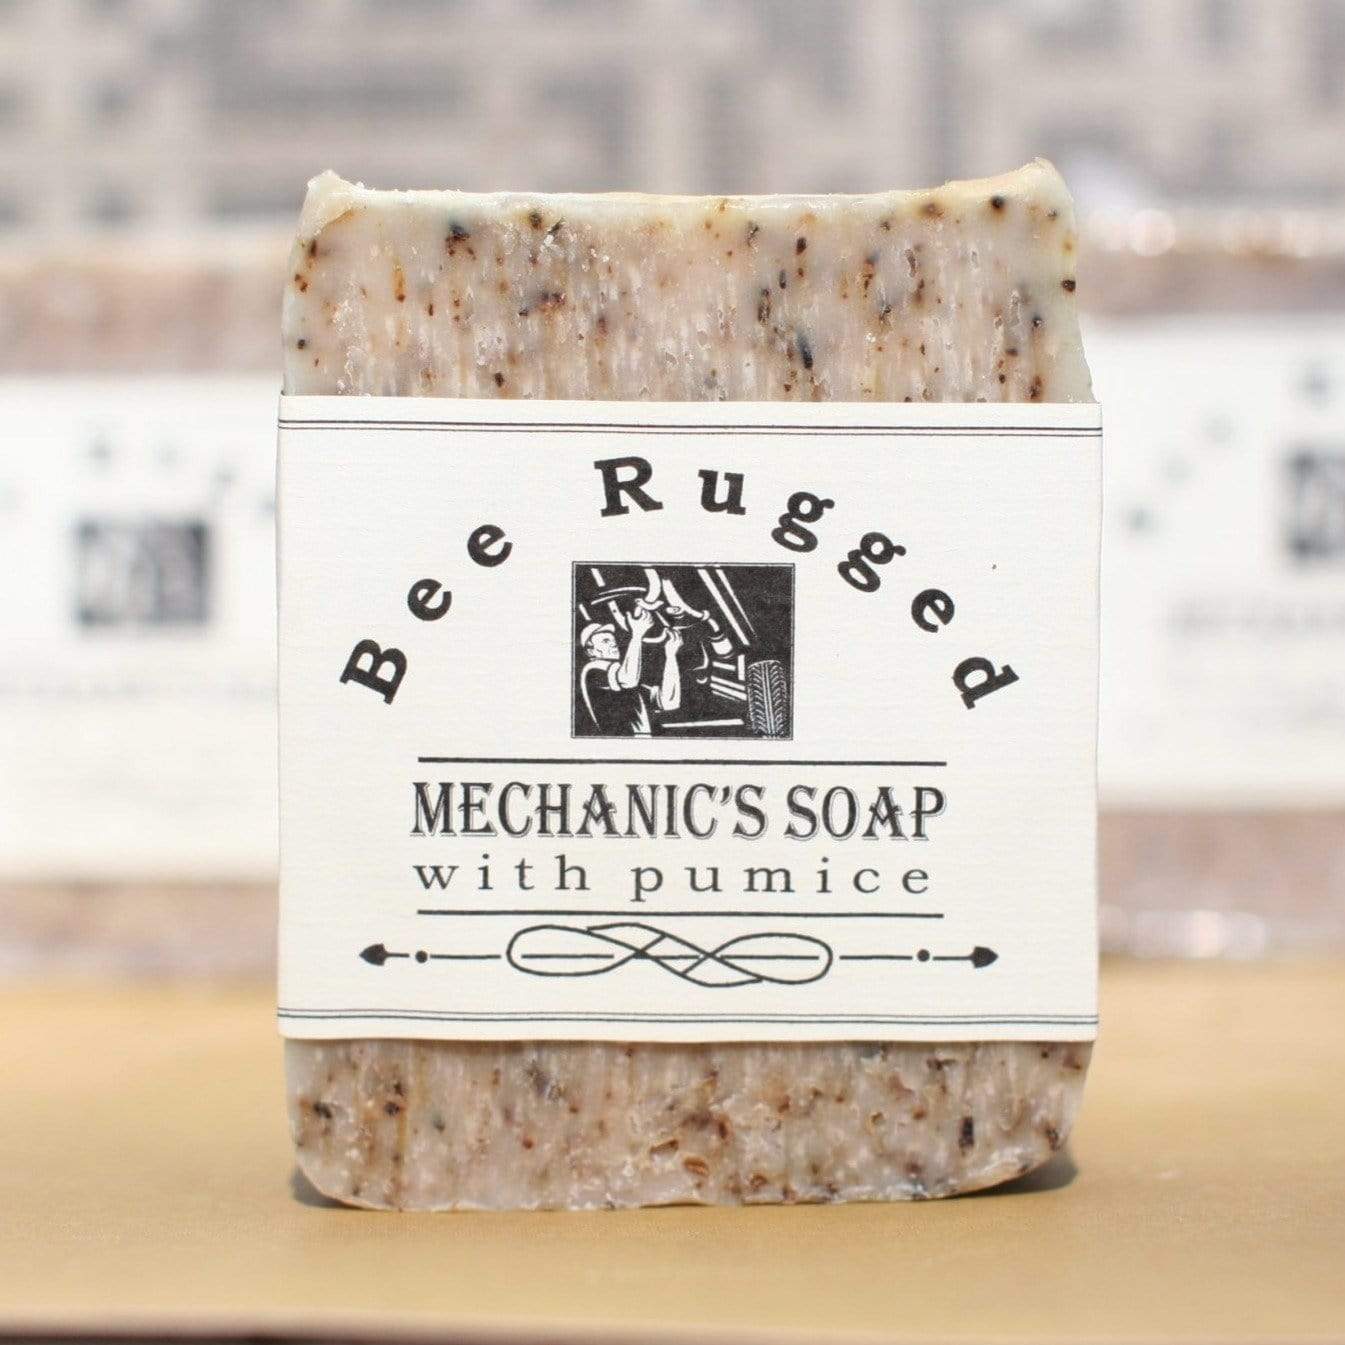 Mechanic's Bar Soap to remove grease and dirt from hands by Bee Lovely  Botanicals - BeeLovelyBotanicals